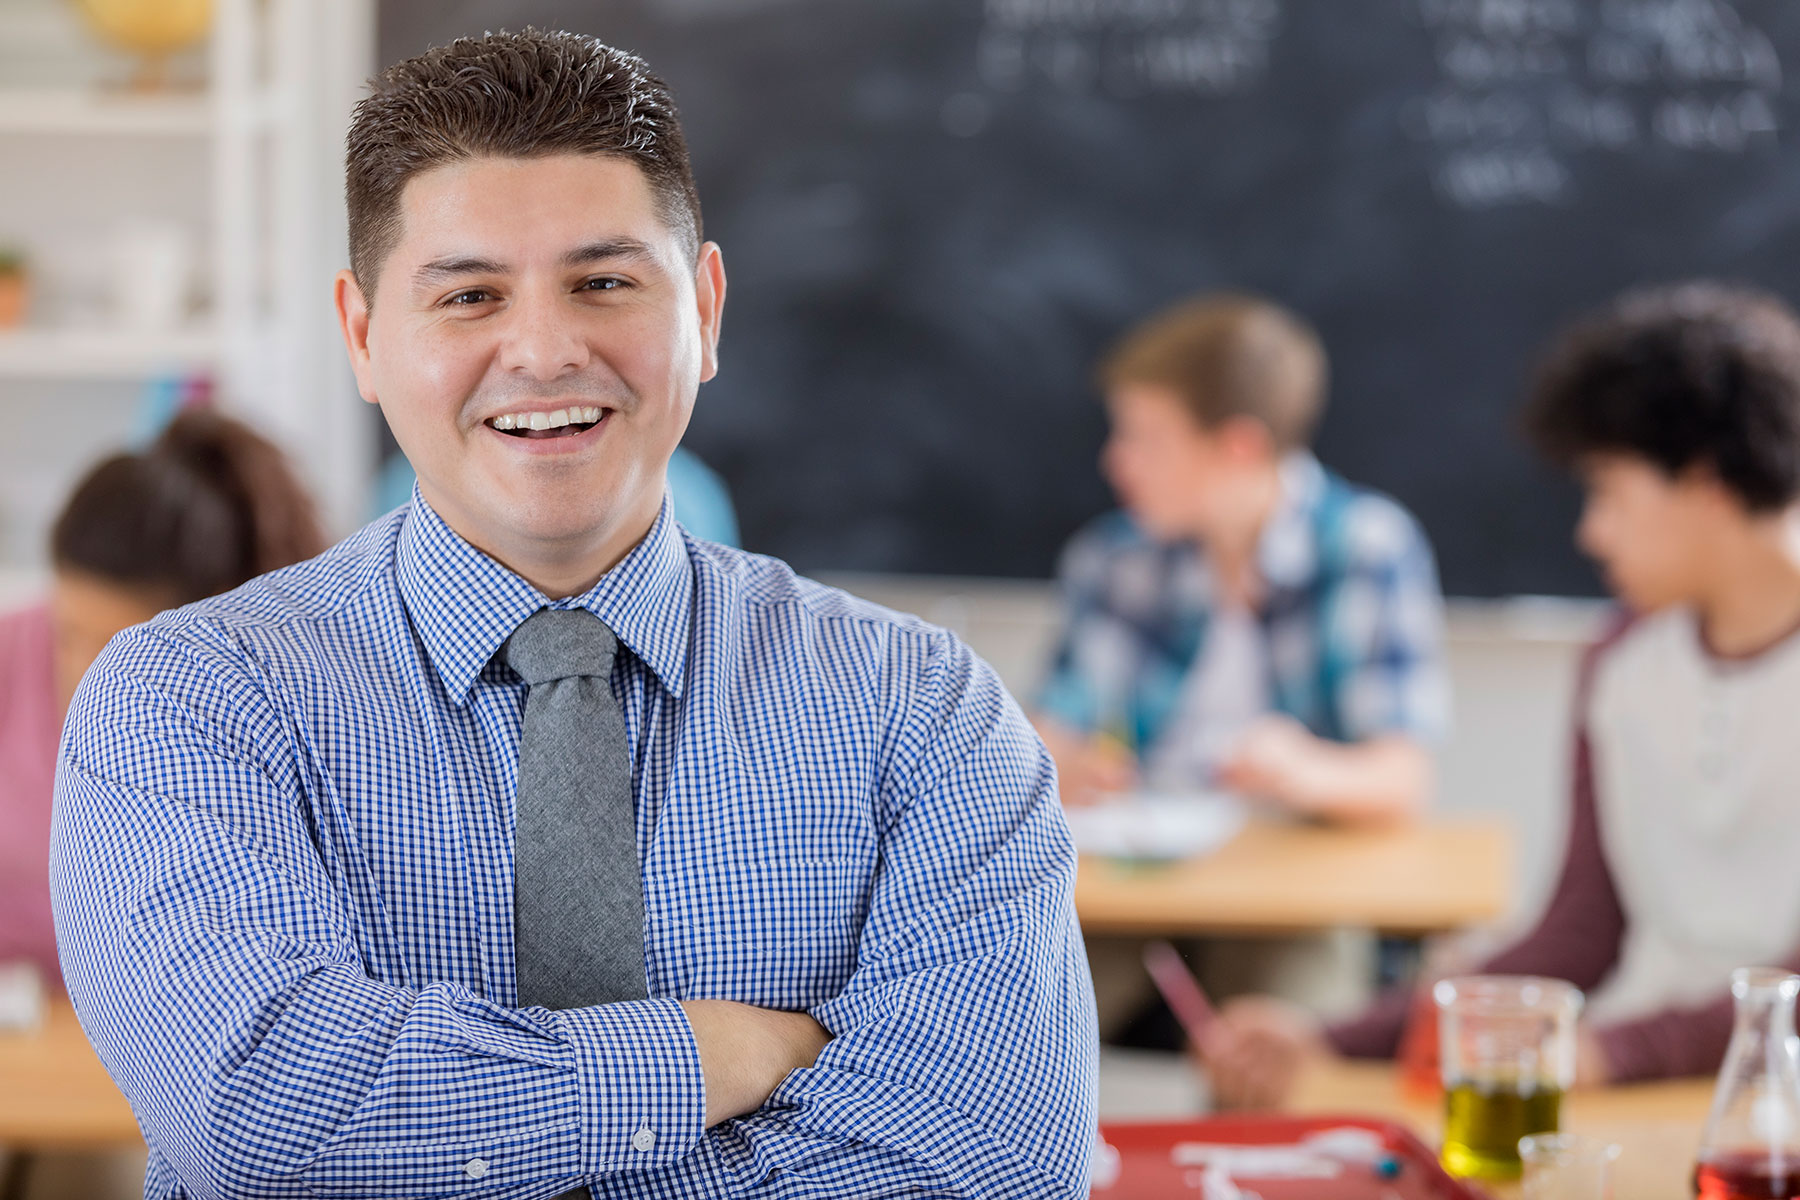 Male teacher in front of class, smiling